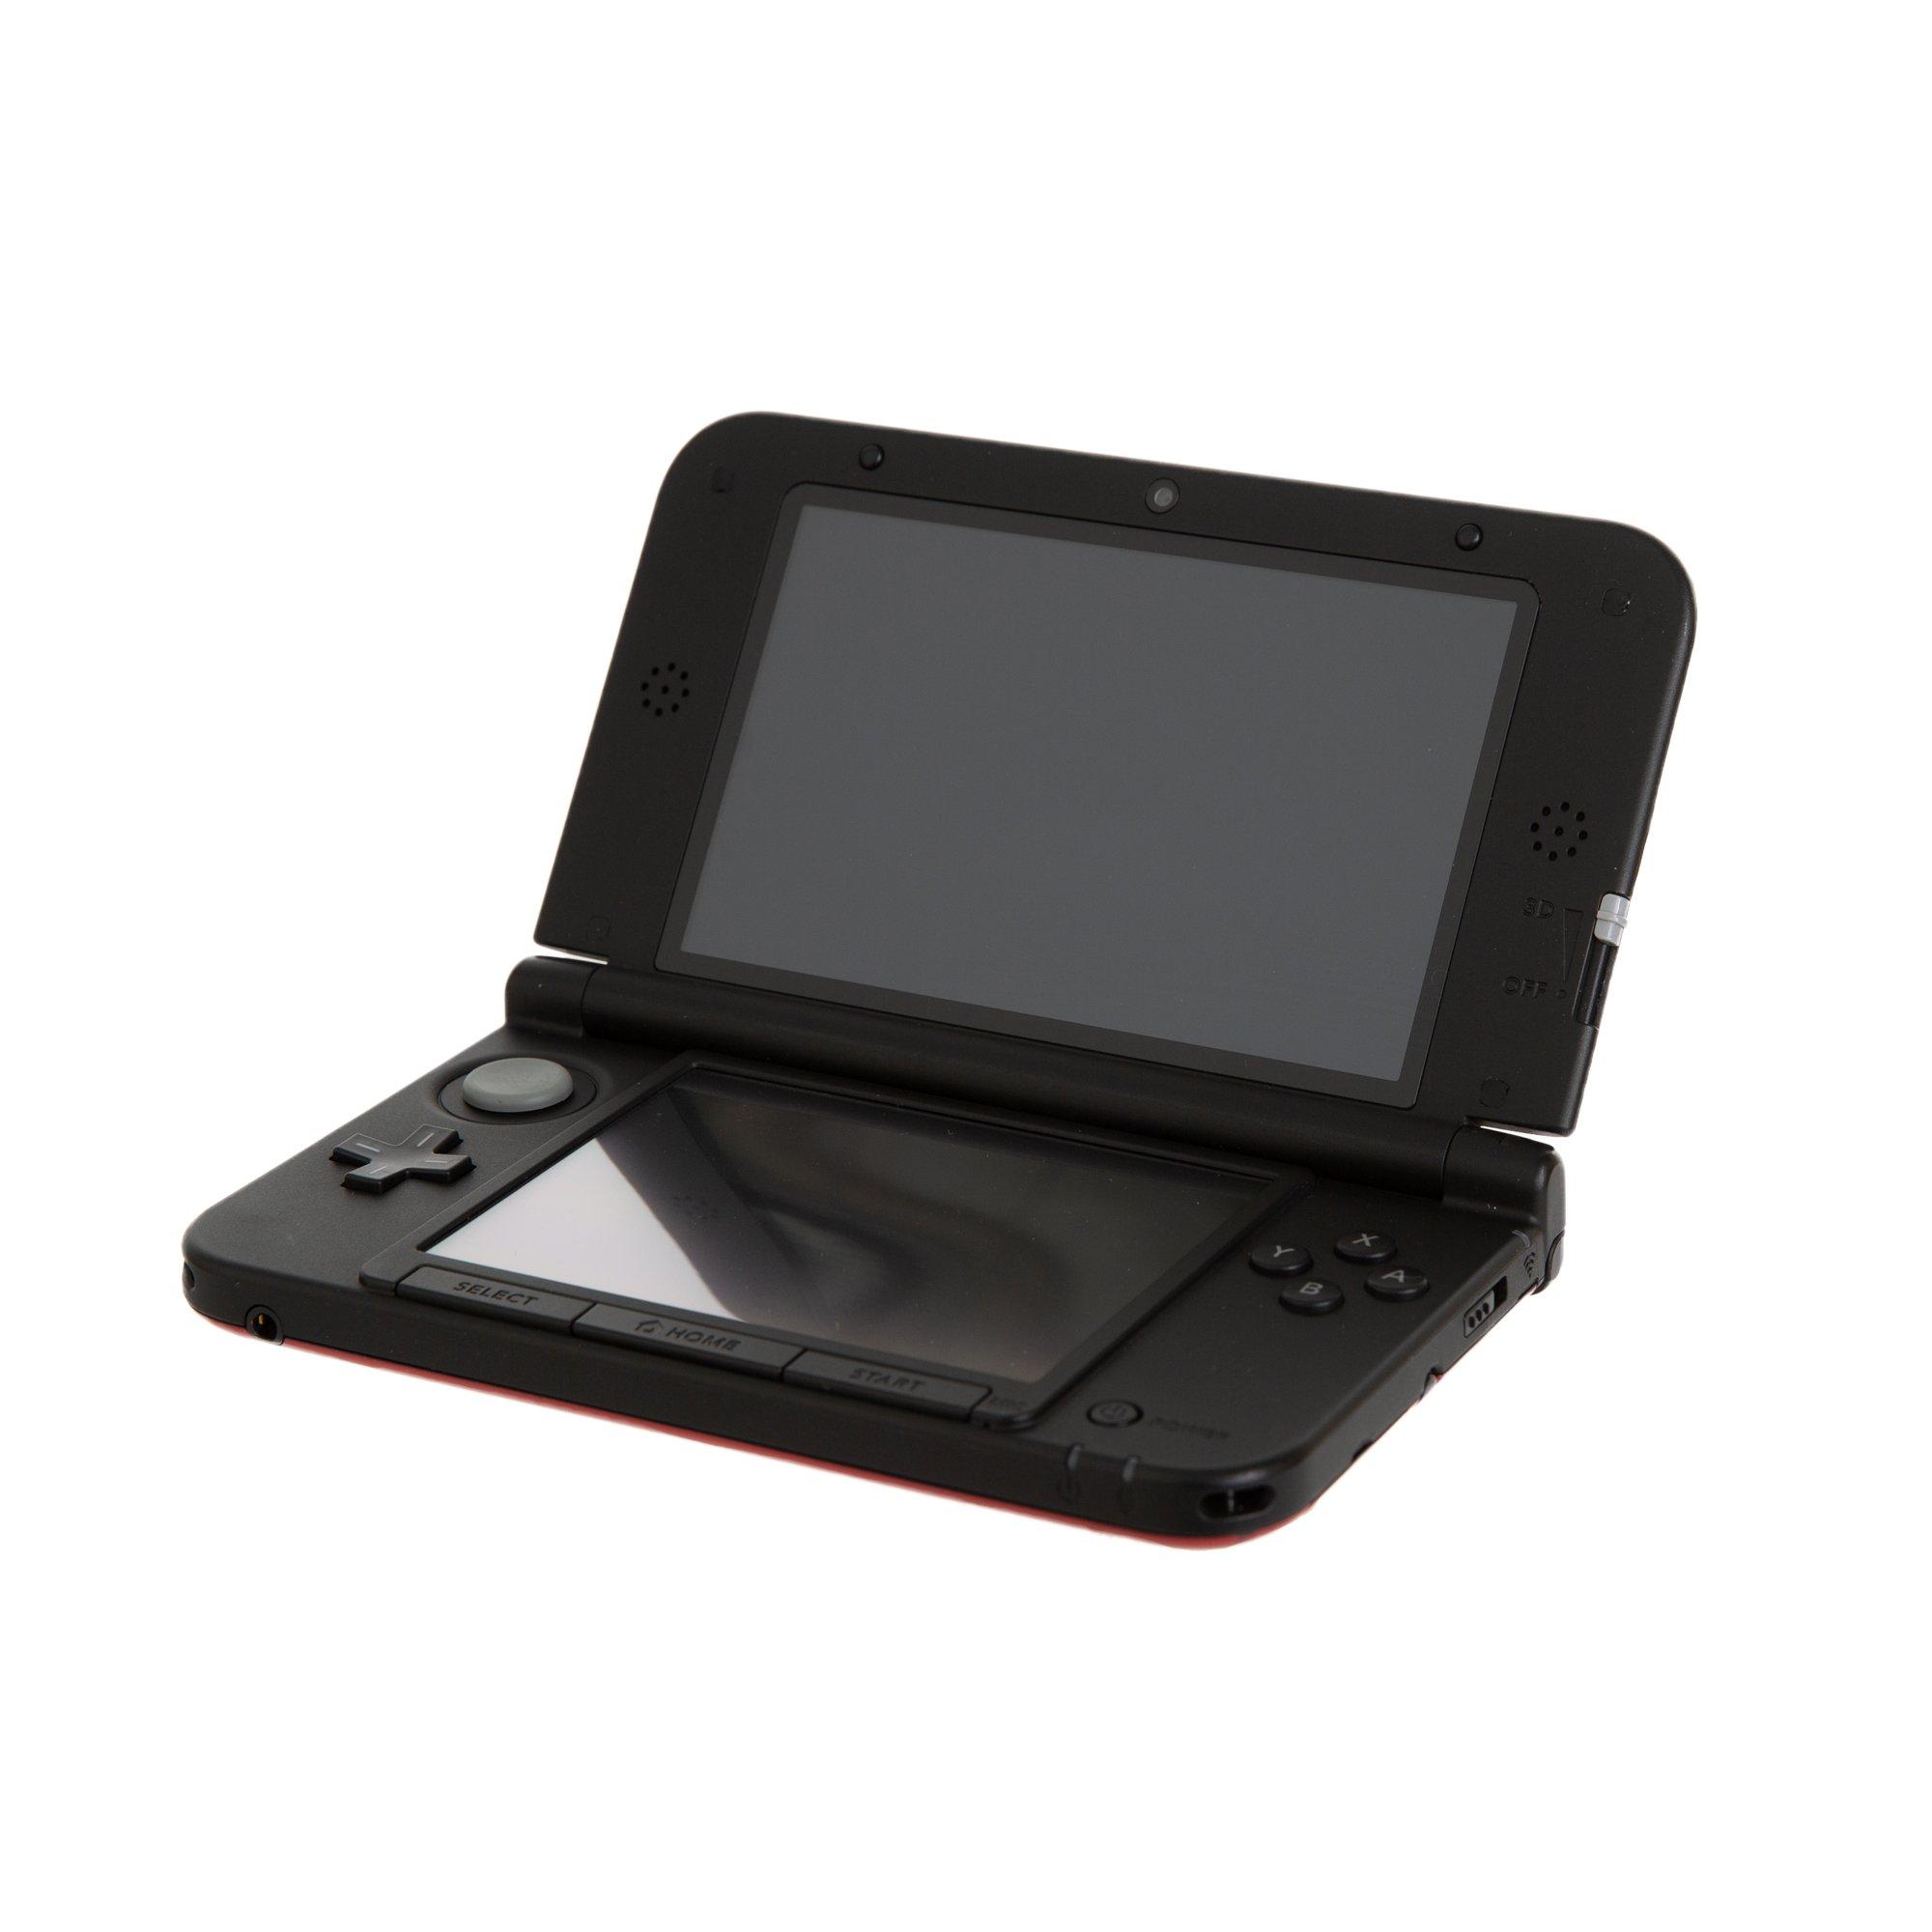 is there anyway to hook up the original 3ds to a tv? : r/3DS